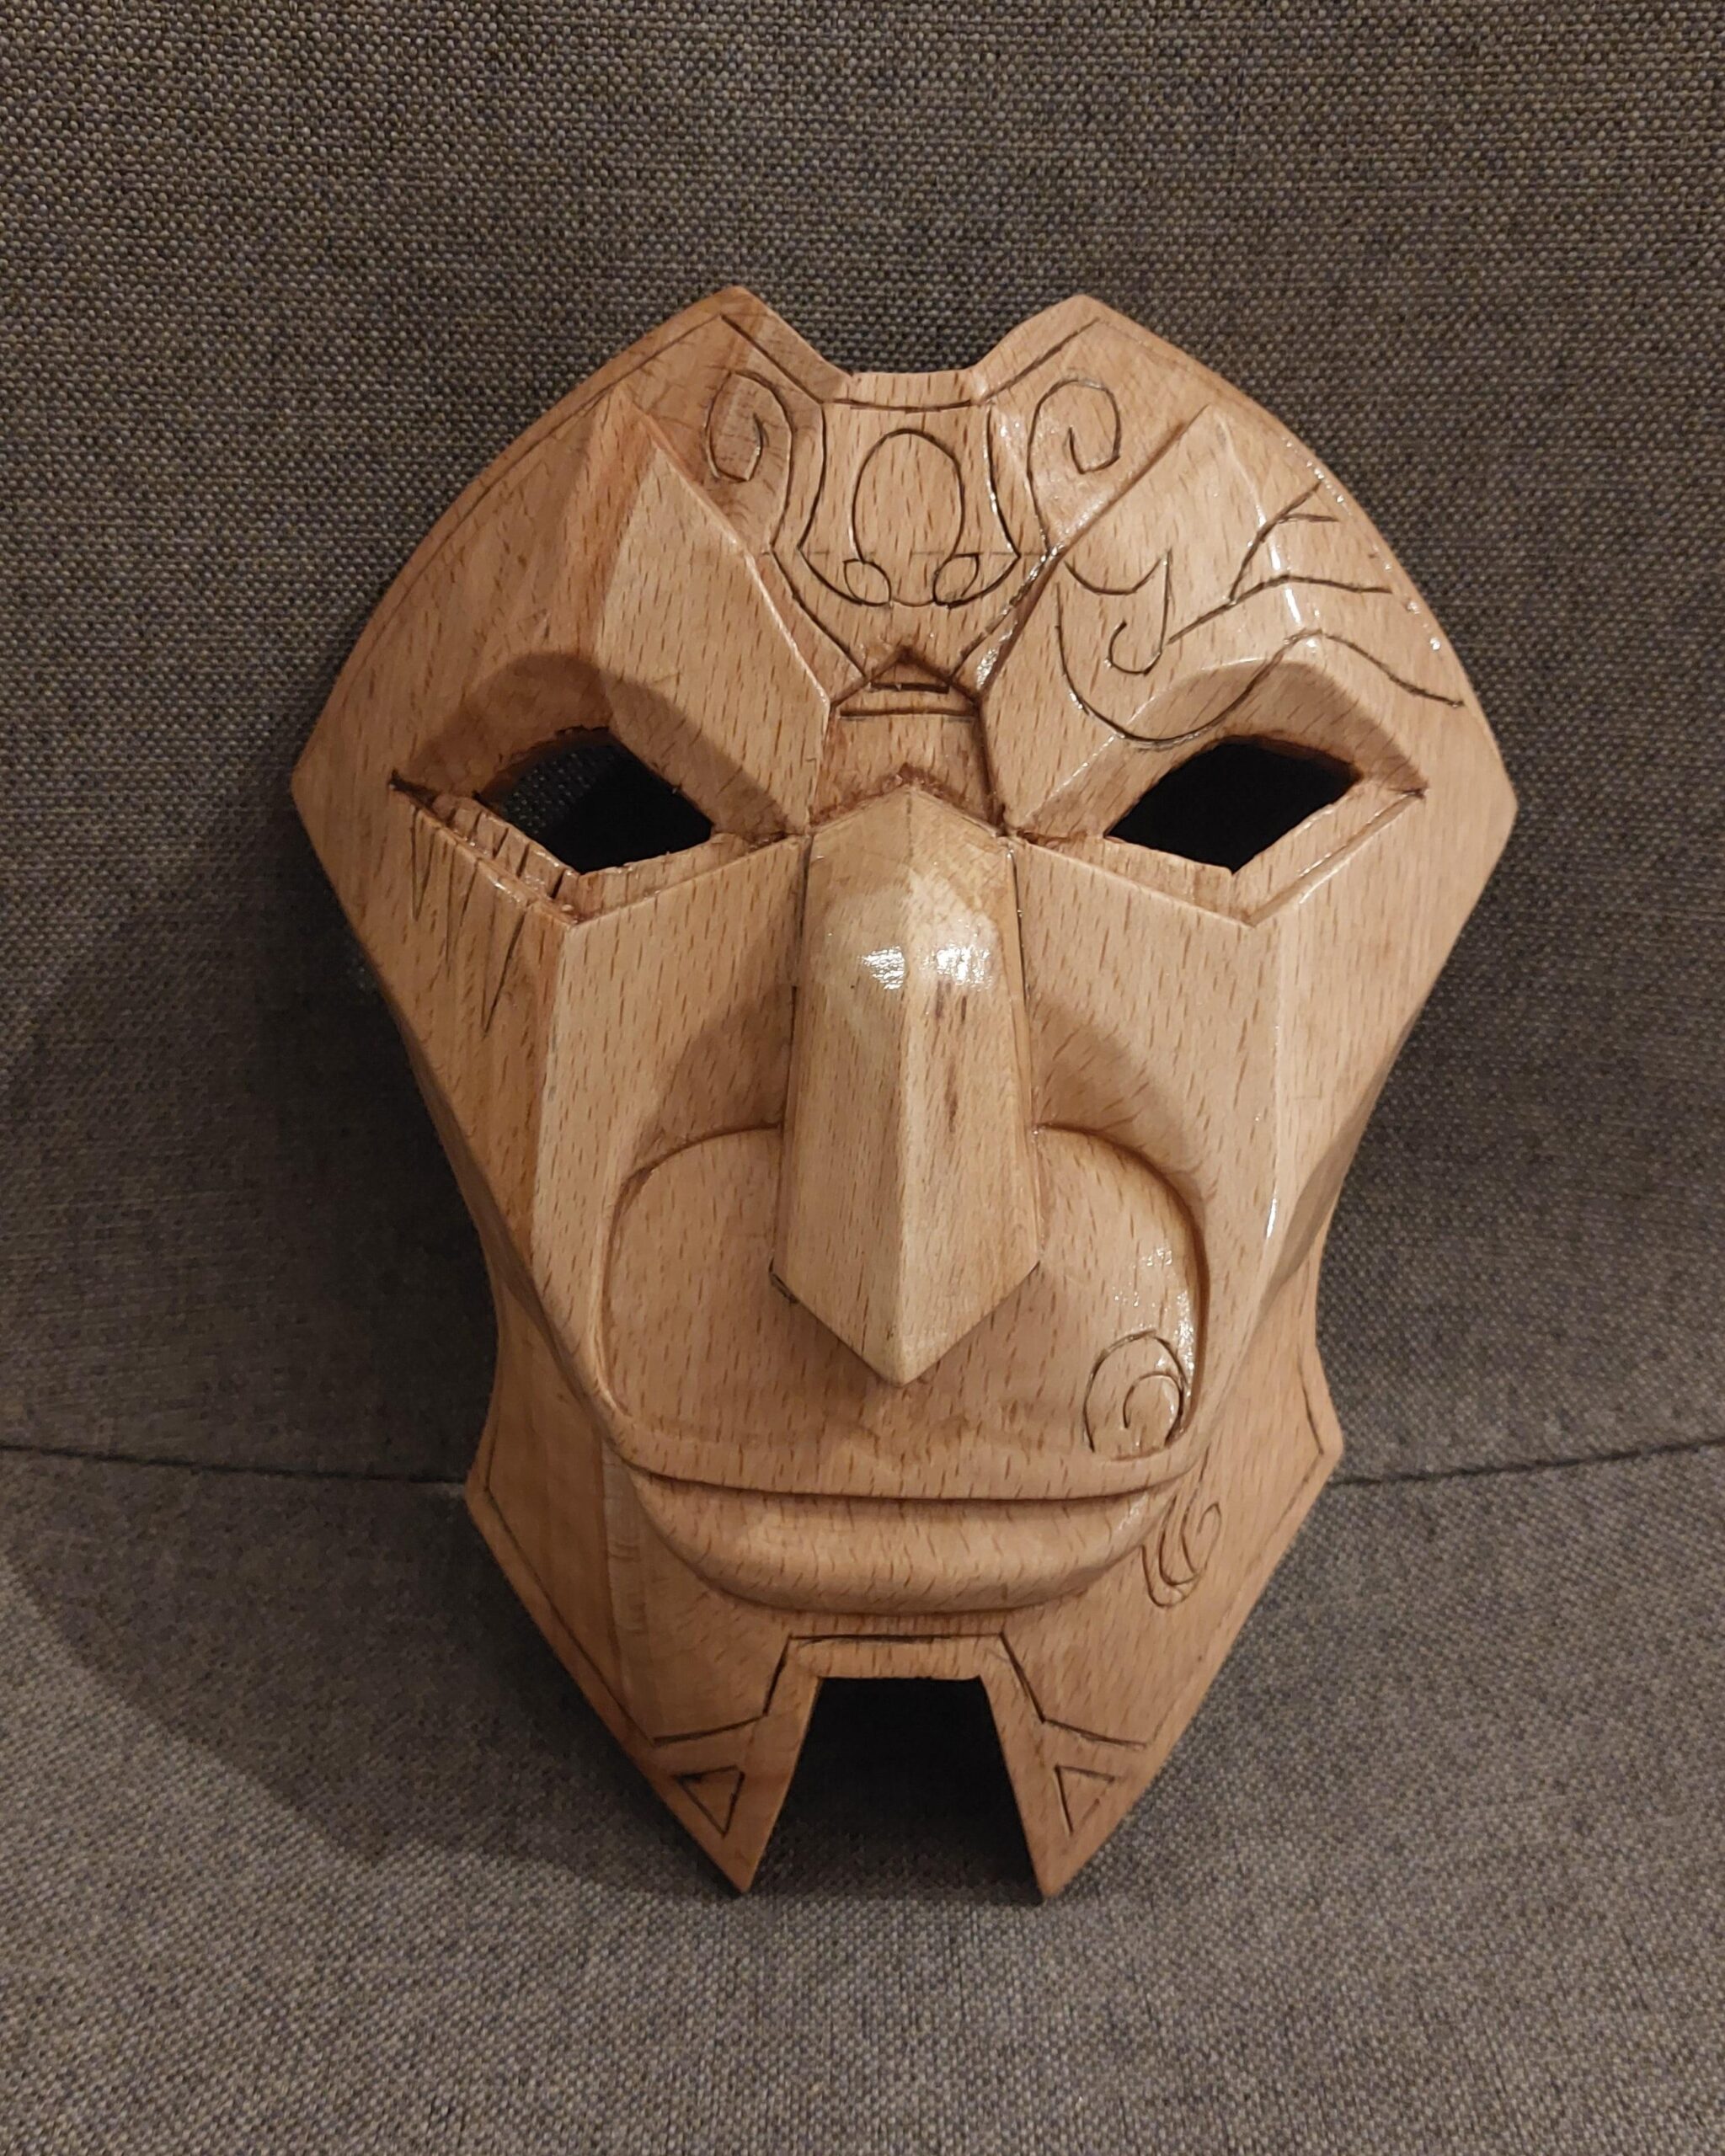 Jhin conceal from League of Legends. Crafted by me